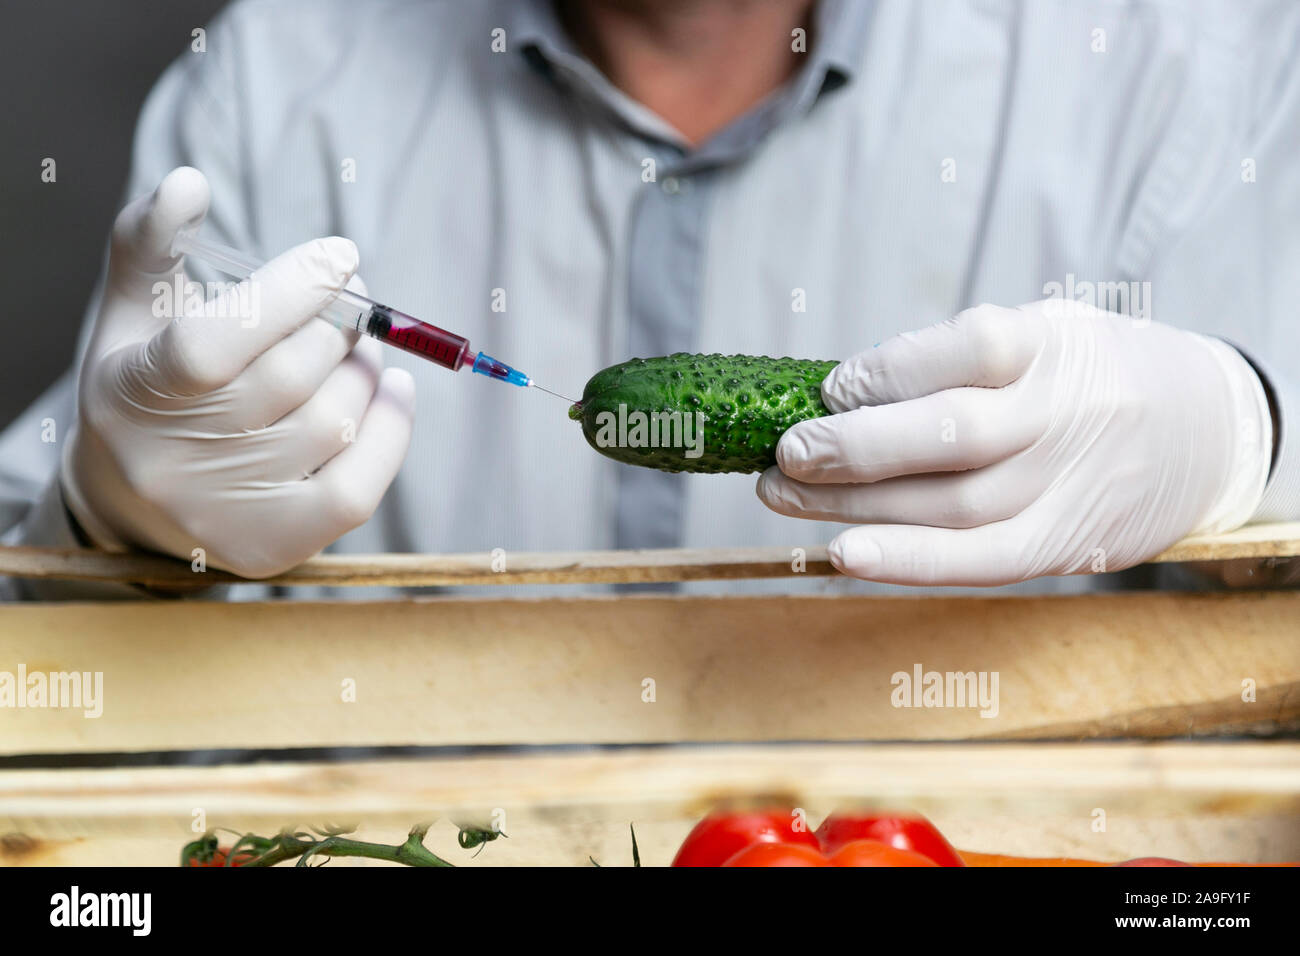 A man injects chemicals into a cucumber, fertilizers and chemicals with a syringe to increase the shelf life of vegetables. Stock Photo